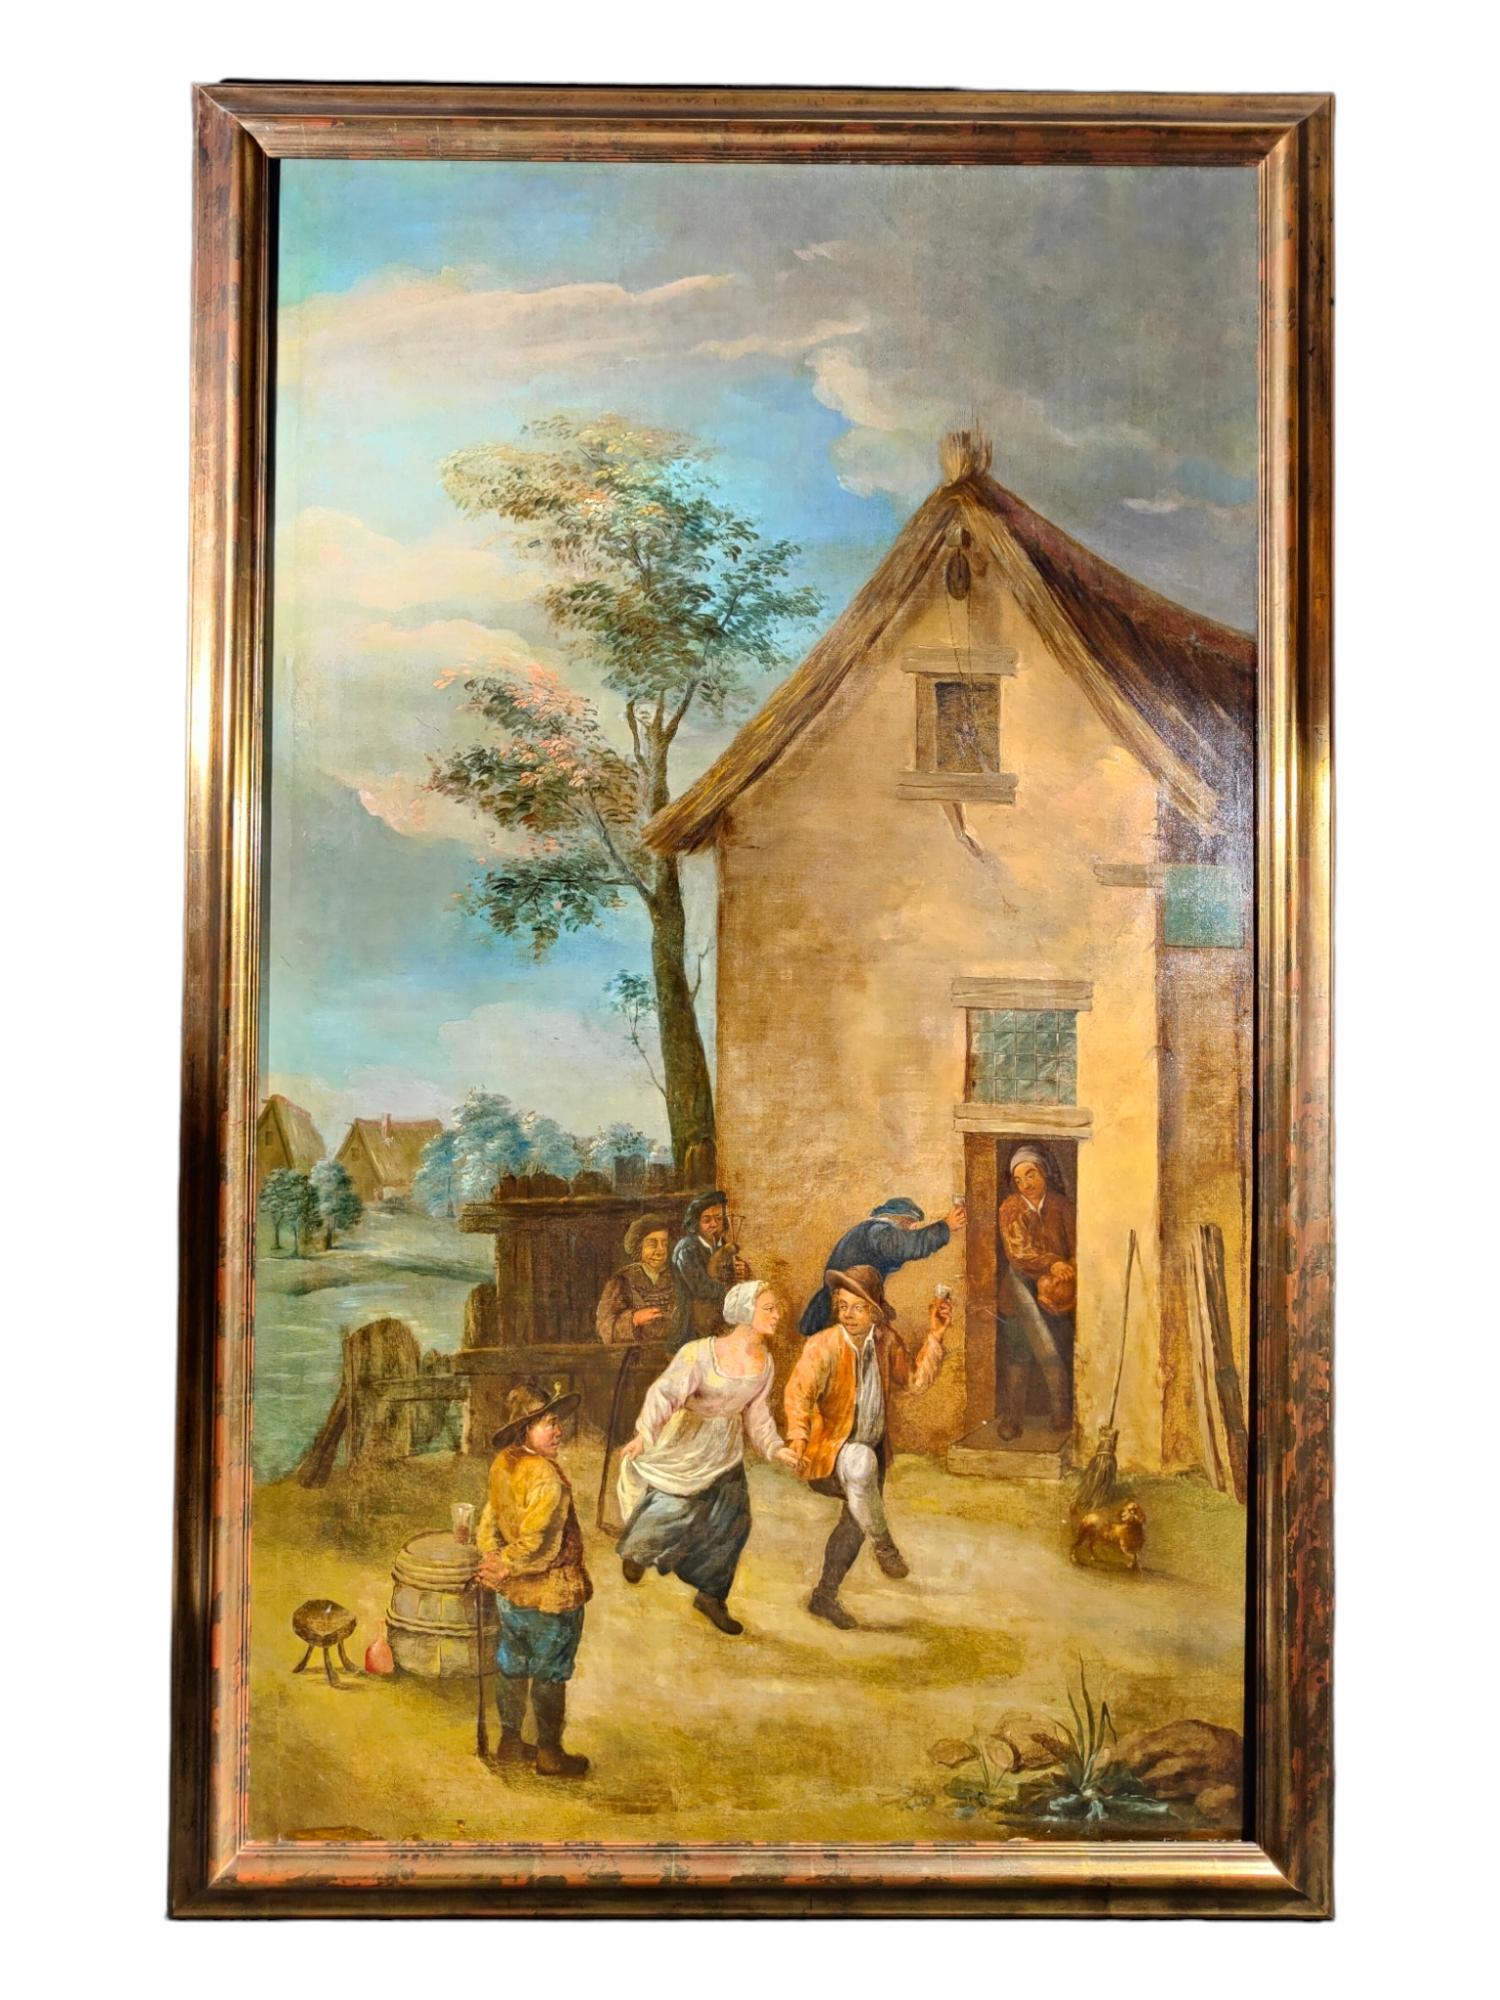 Large Oil On Canvas, Flemish School, XVIIth Century
LARGE OIL ON CANVAS, FLEMISH SCHOOL, 17TH CENTURY
LARGE FORMAT, OIL ON CANVAS FROM THE 17TH CENTURY APPARENTLY UNSIGNED. A FOLLOWER OF BRUGHEL THE OLD. SCENE WITH VARIOUS CHARACTERS DRESSED FROM